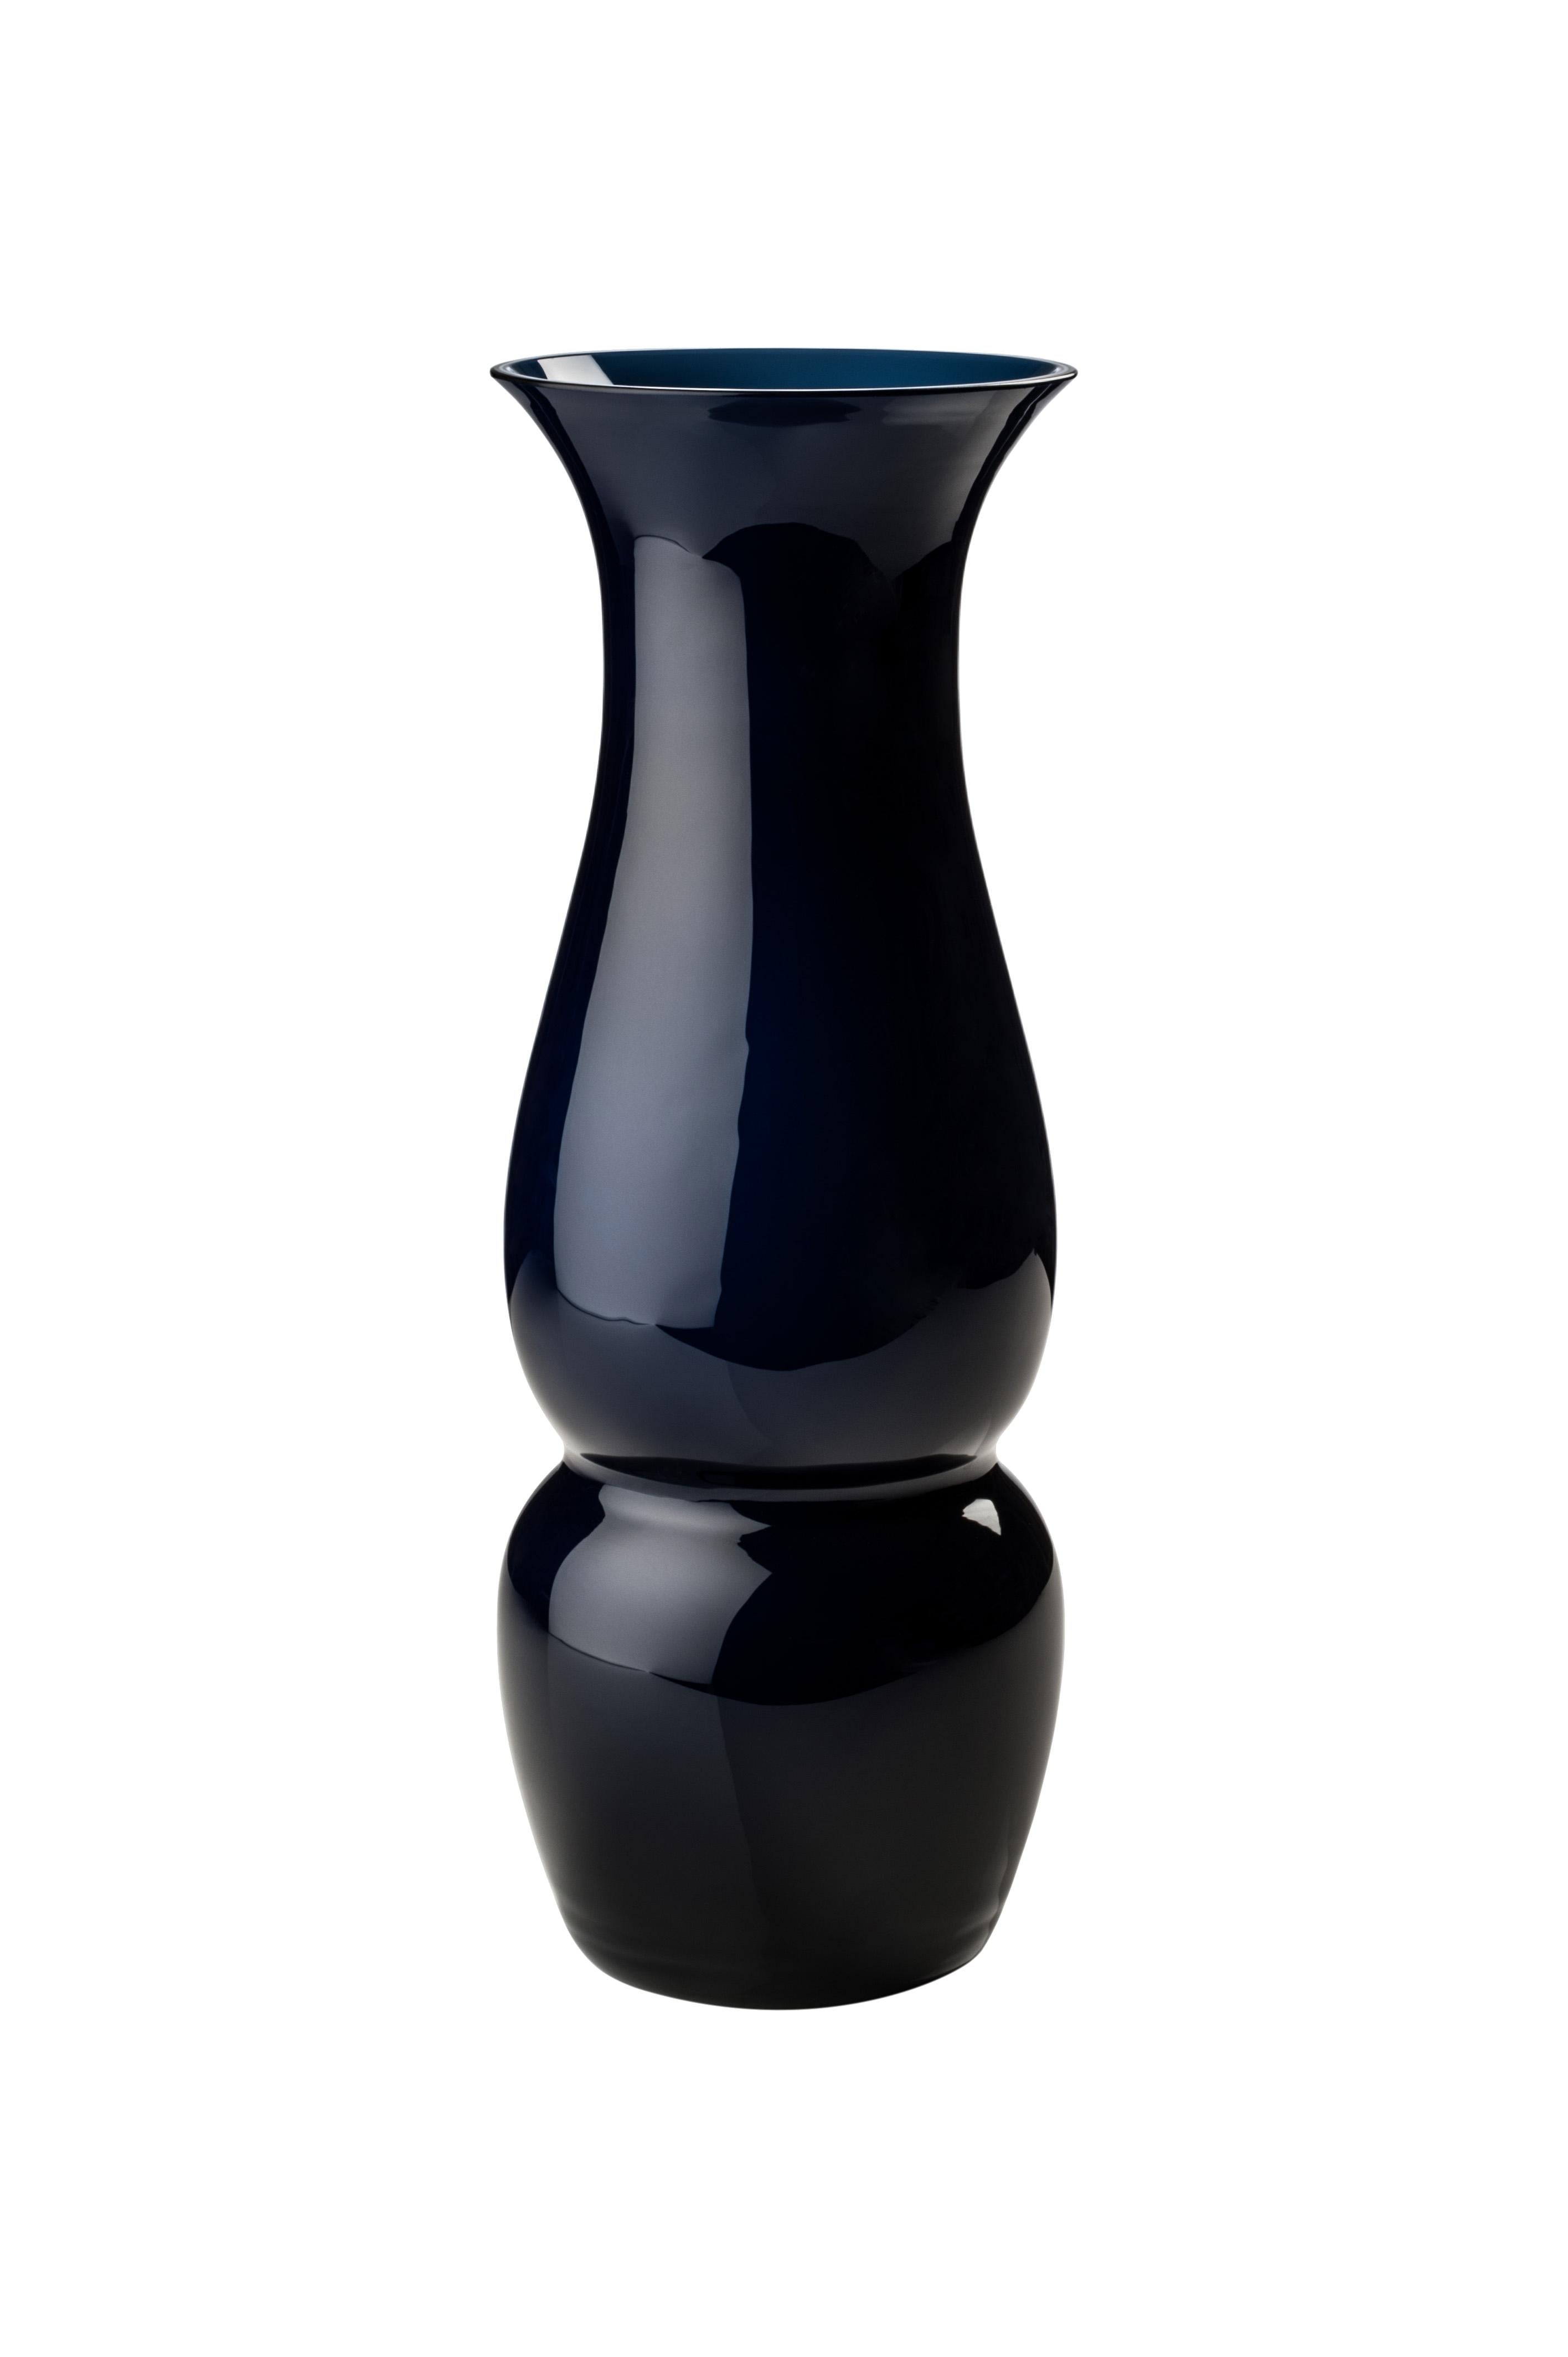 Venini glass vase with elongated body and funnel shaped neck in marine blue designed by Leonardo Lanucci in 2016. Perfect for indoor home decor as container or strong statement piece for any room. Also available in other colors on